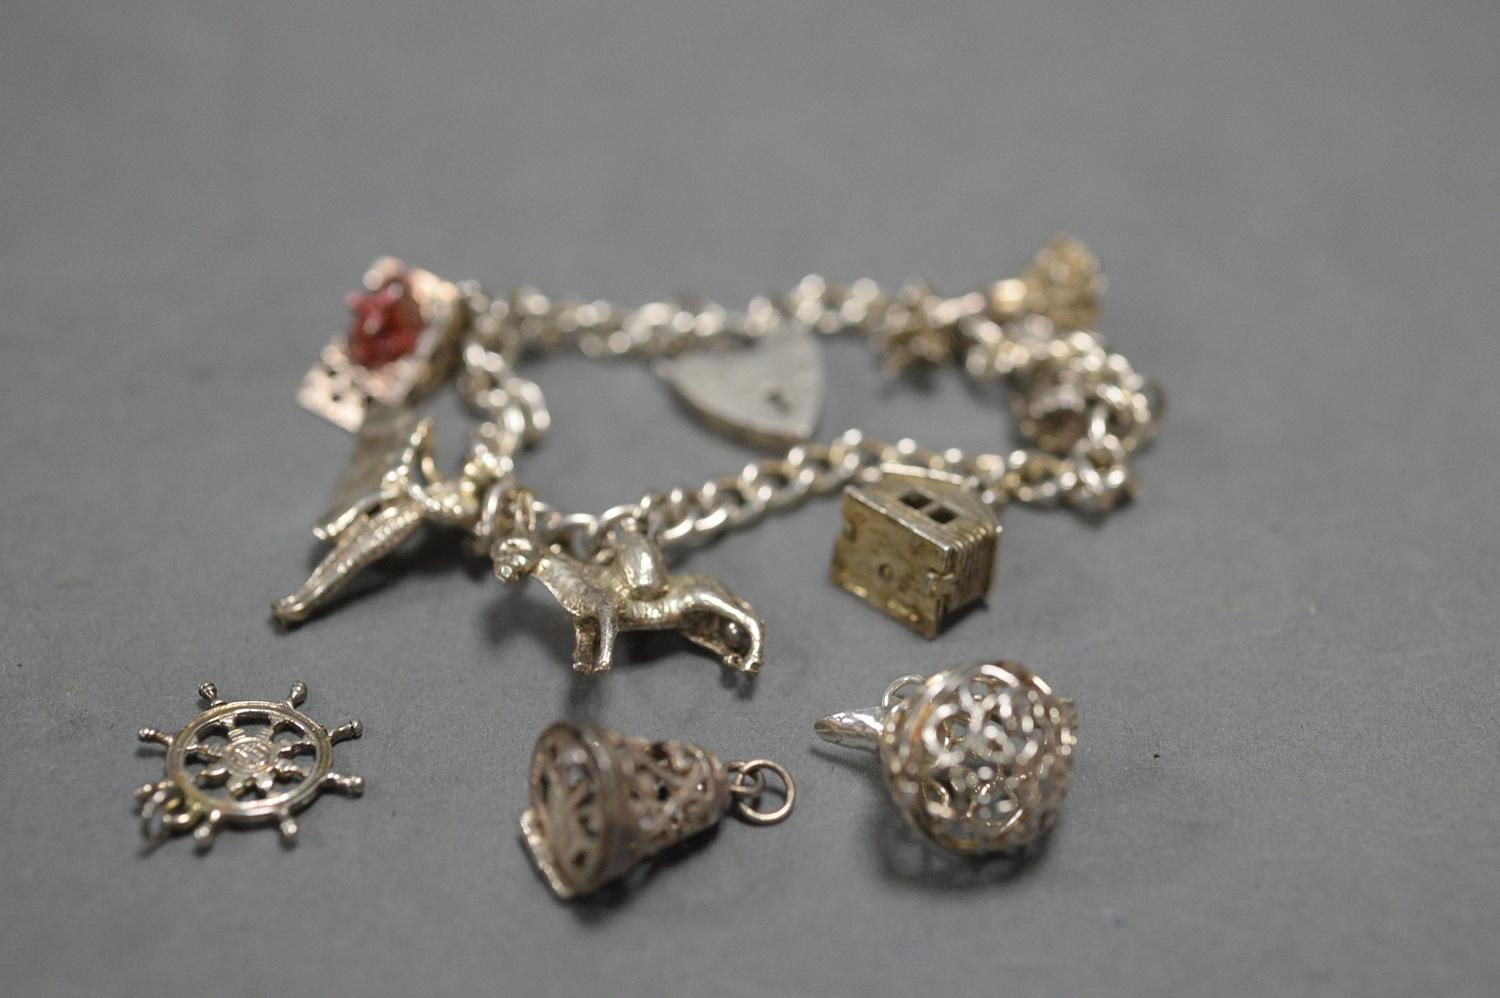 STERLING SILVER CHARM BRACELET. Total weight 43g - Image 2 of 2